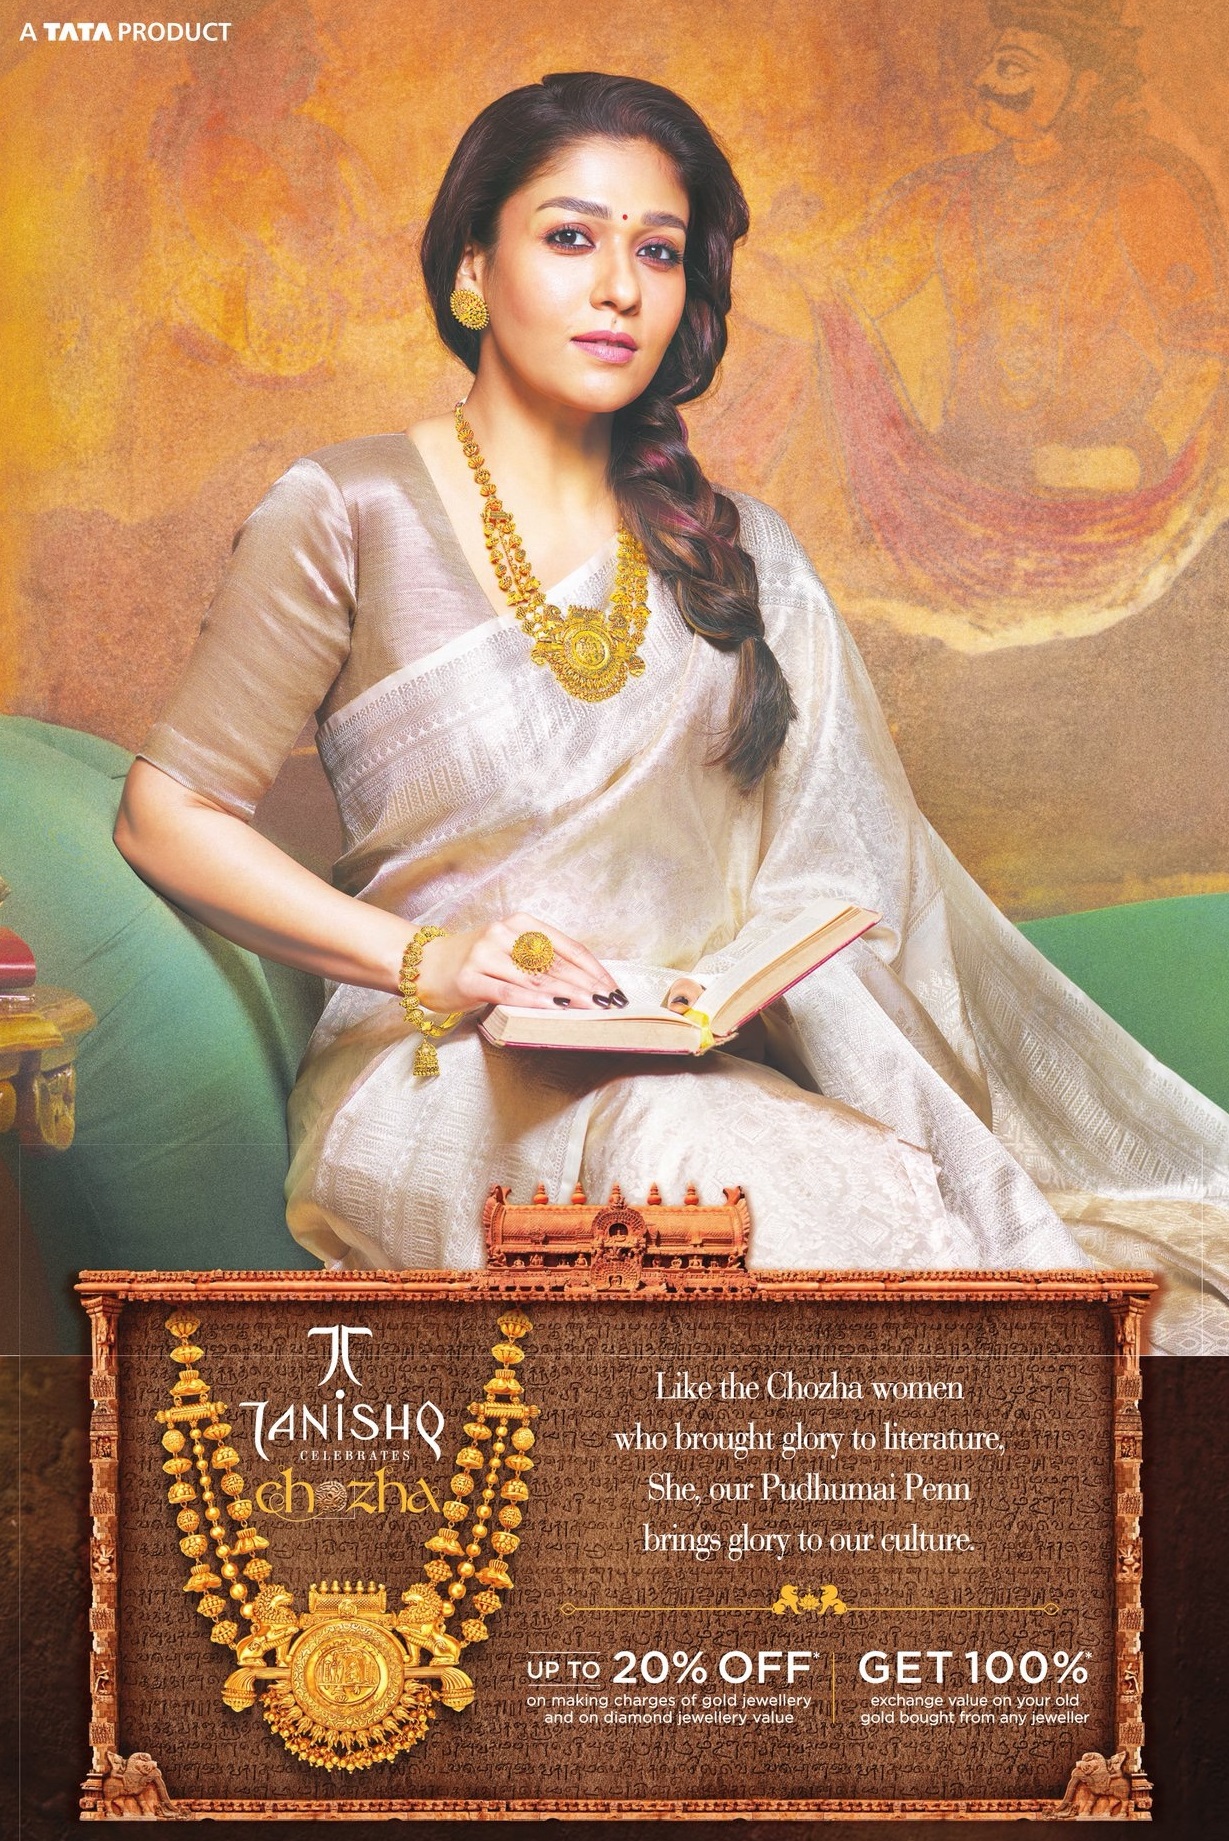 tanishq advertisement and nayanthara ad creating issue on social media video viral